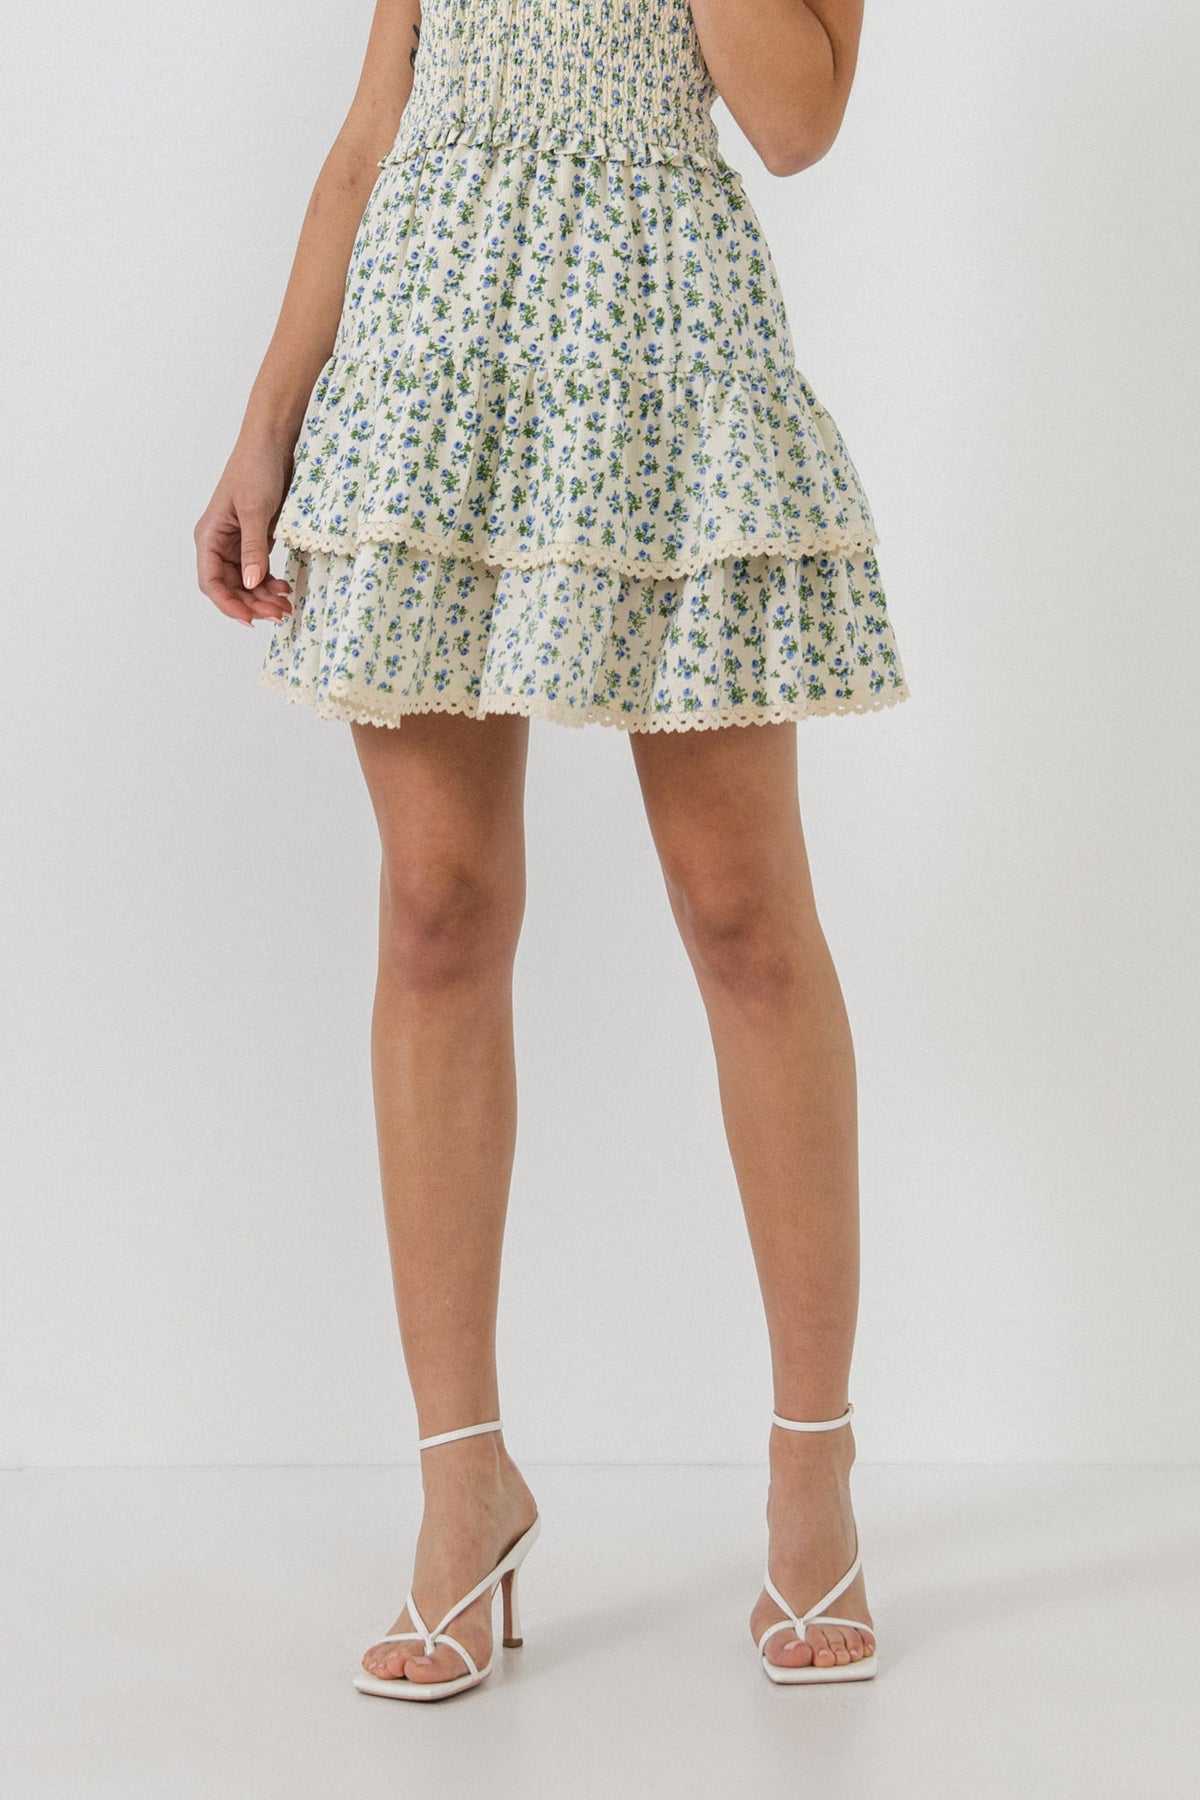 FREE THE ROSES - Floral Lace Trim Detail MIni Skirt - SKIRTS available at Objectrare